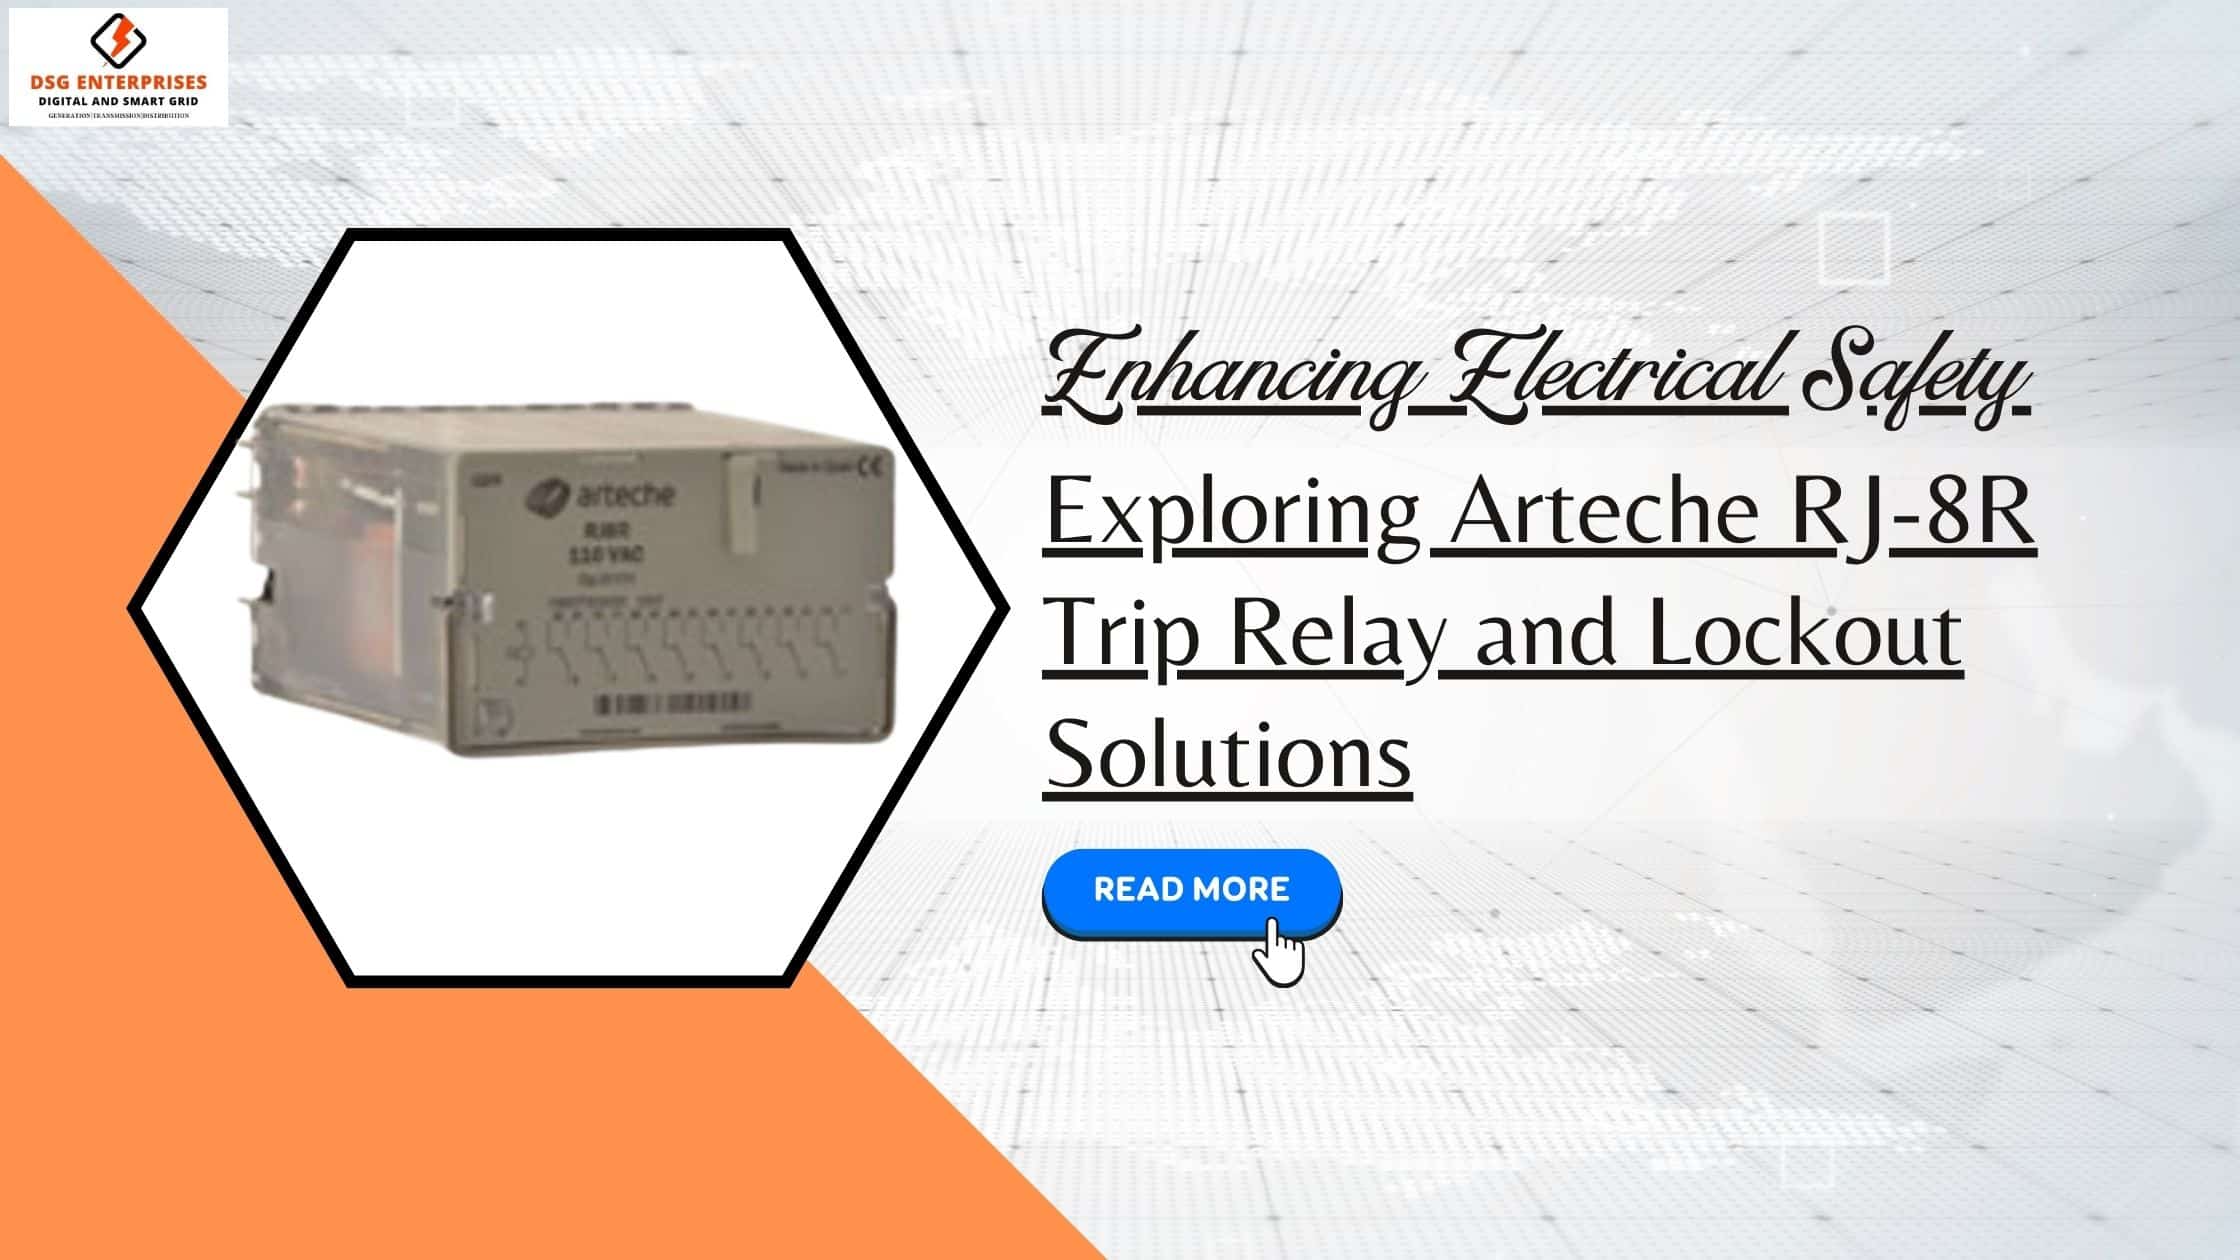 You are currently viewing Enhancing Electrical Safety: Exploring Arteche RJ-8R Trip Relay and Lockout Solutions